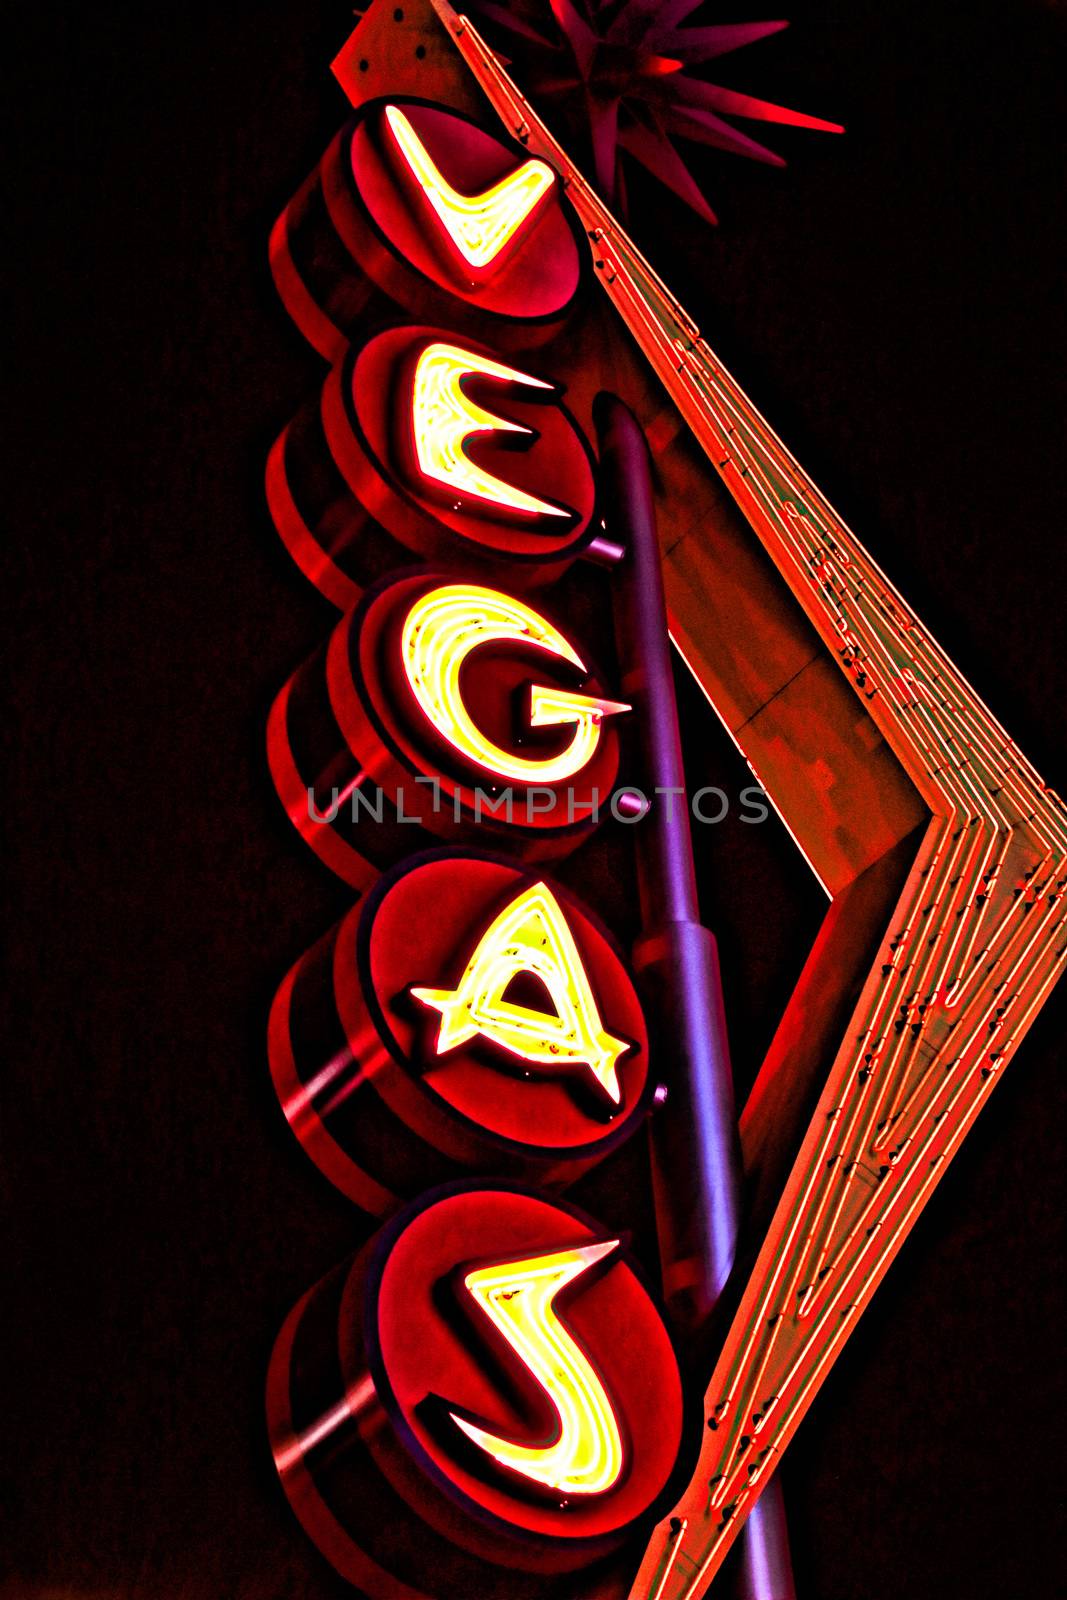 Vegas giant neon sign  on display above the street near Fremont Street Experience in Las Vegas. by USA-TARO